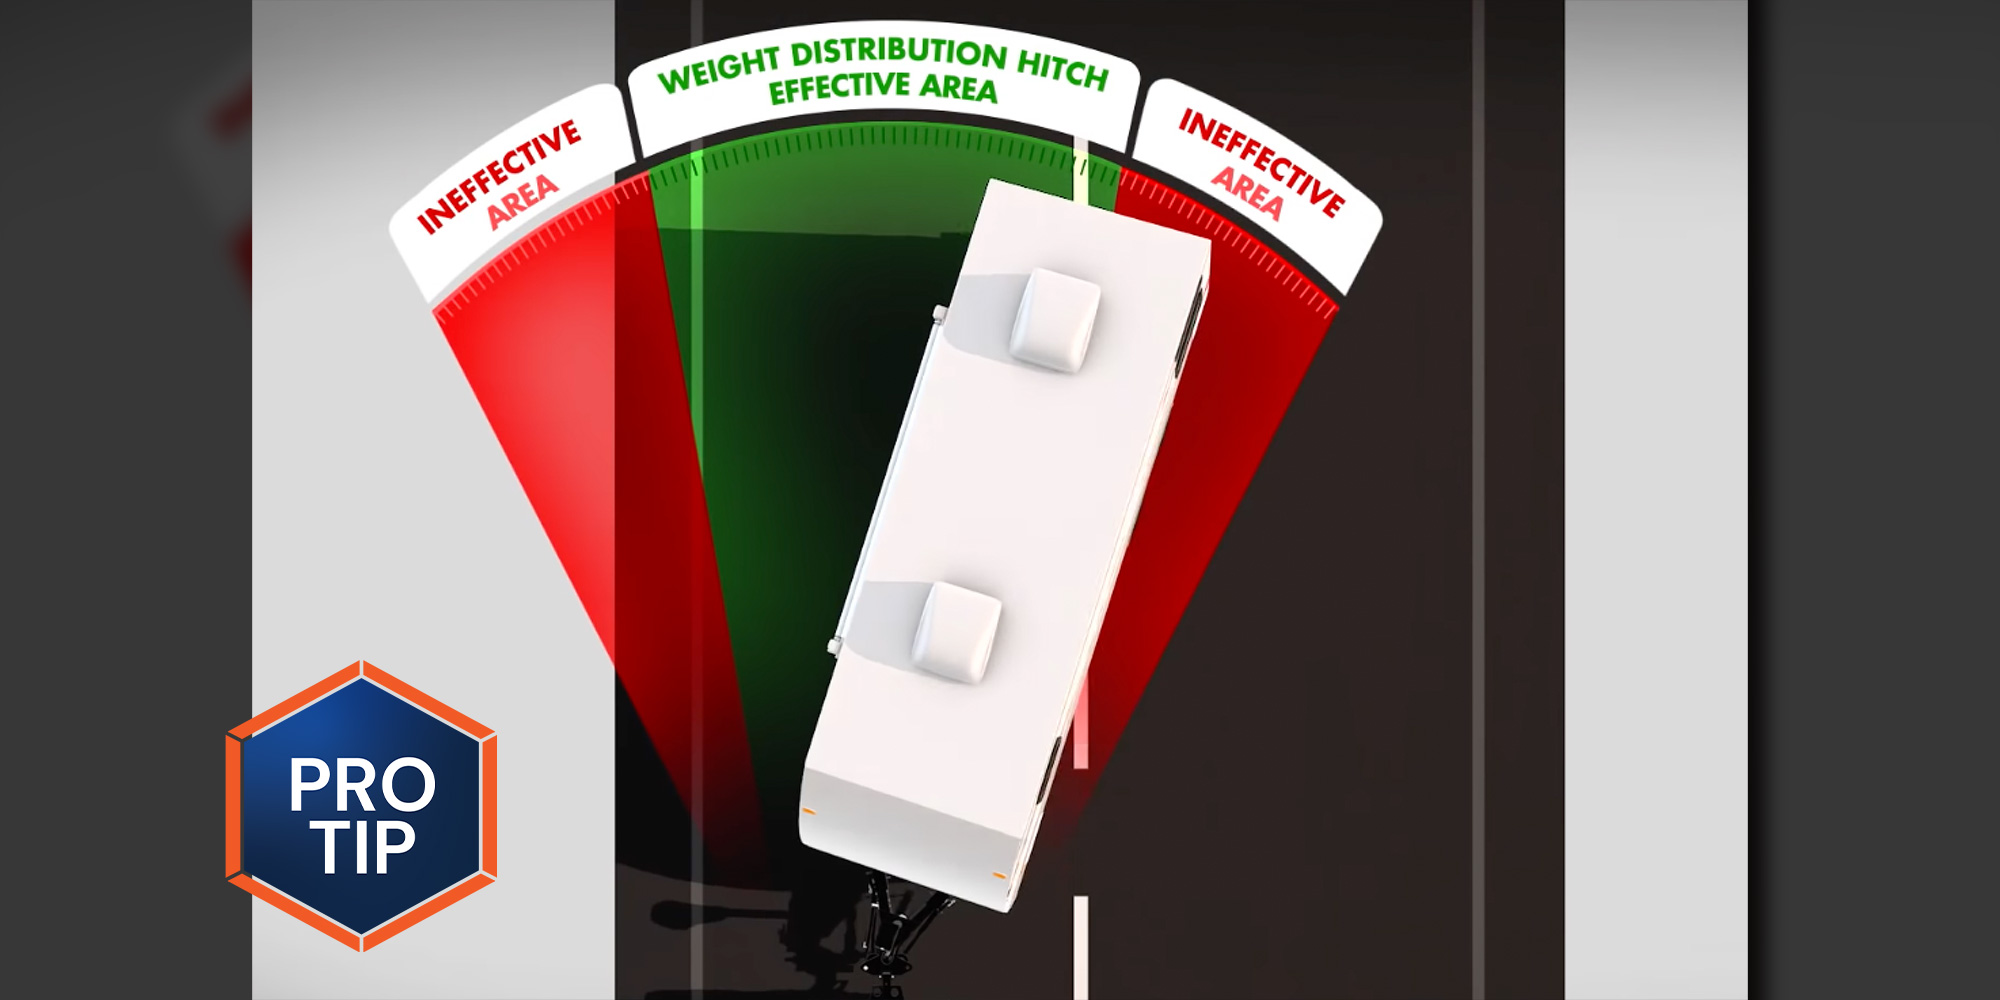 a Lippert graphic showing the areas of effective and ineffective areas of a weight distribution hitch